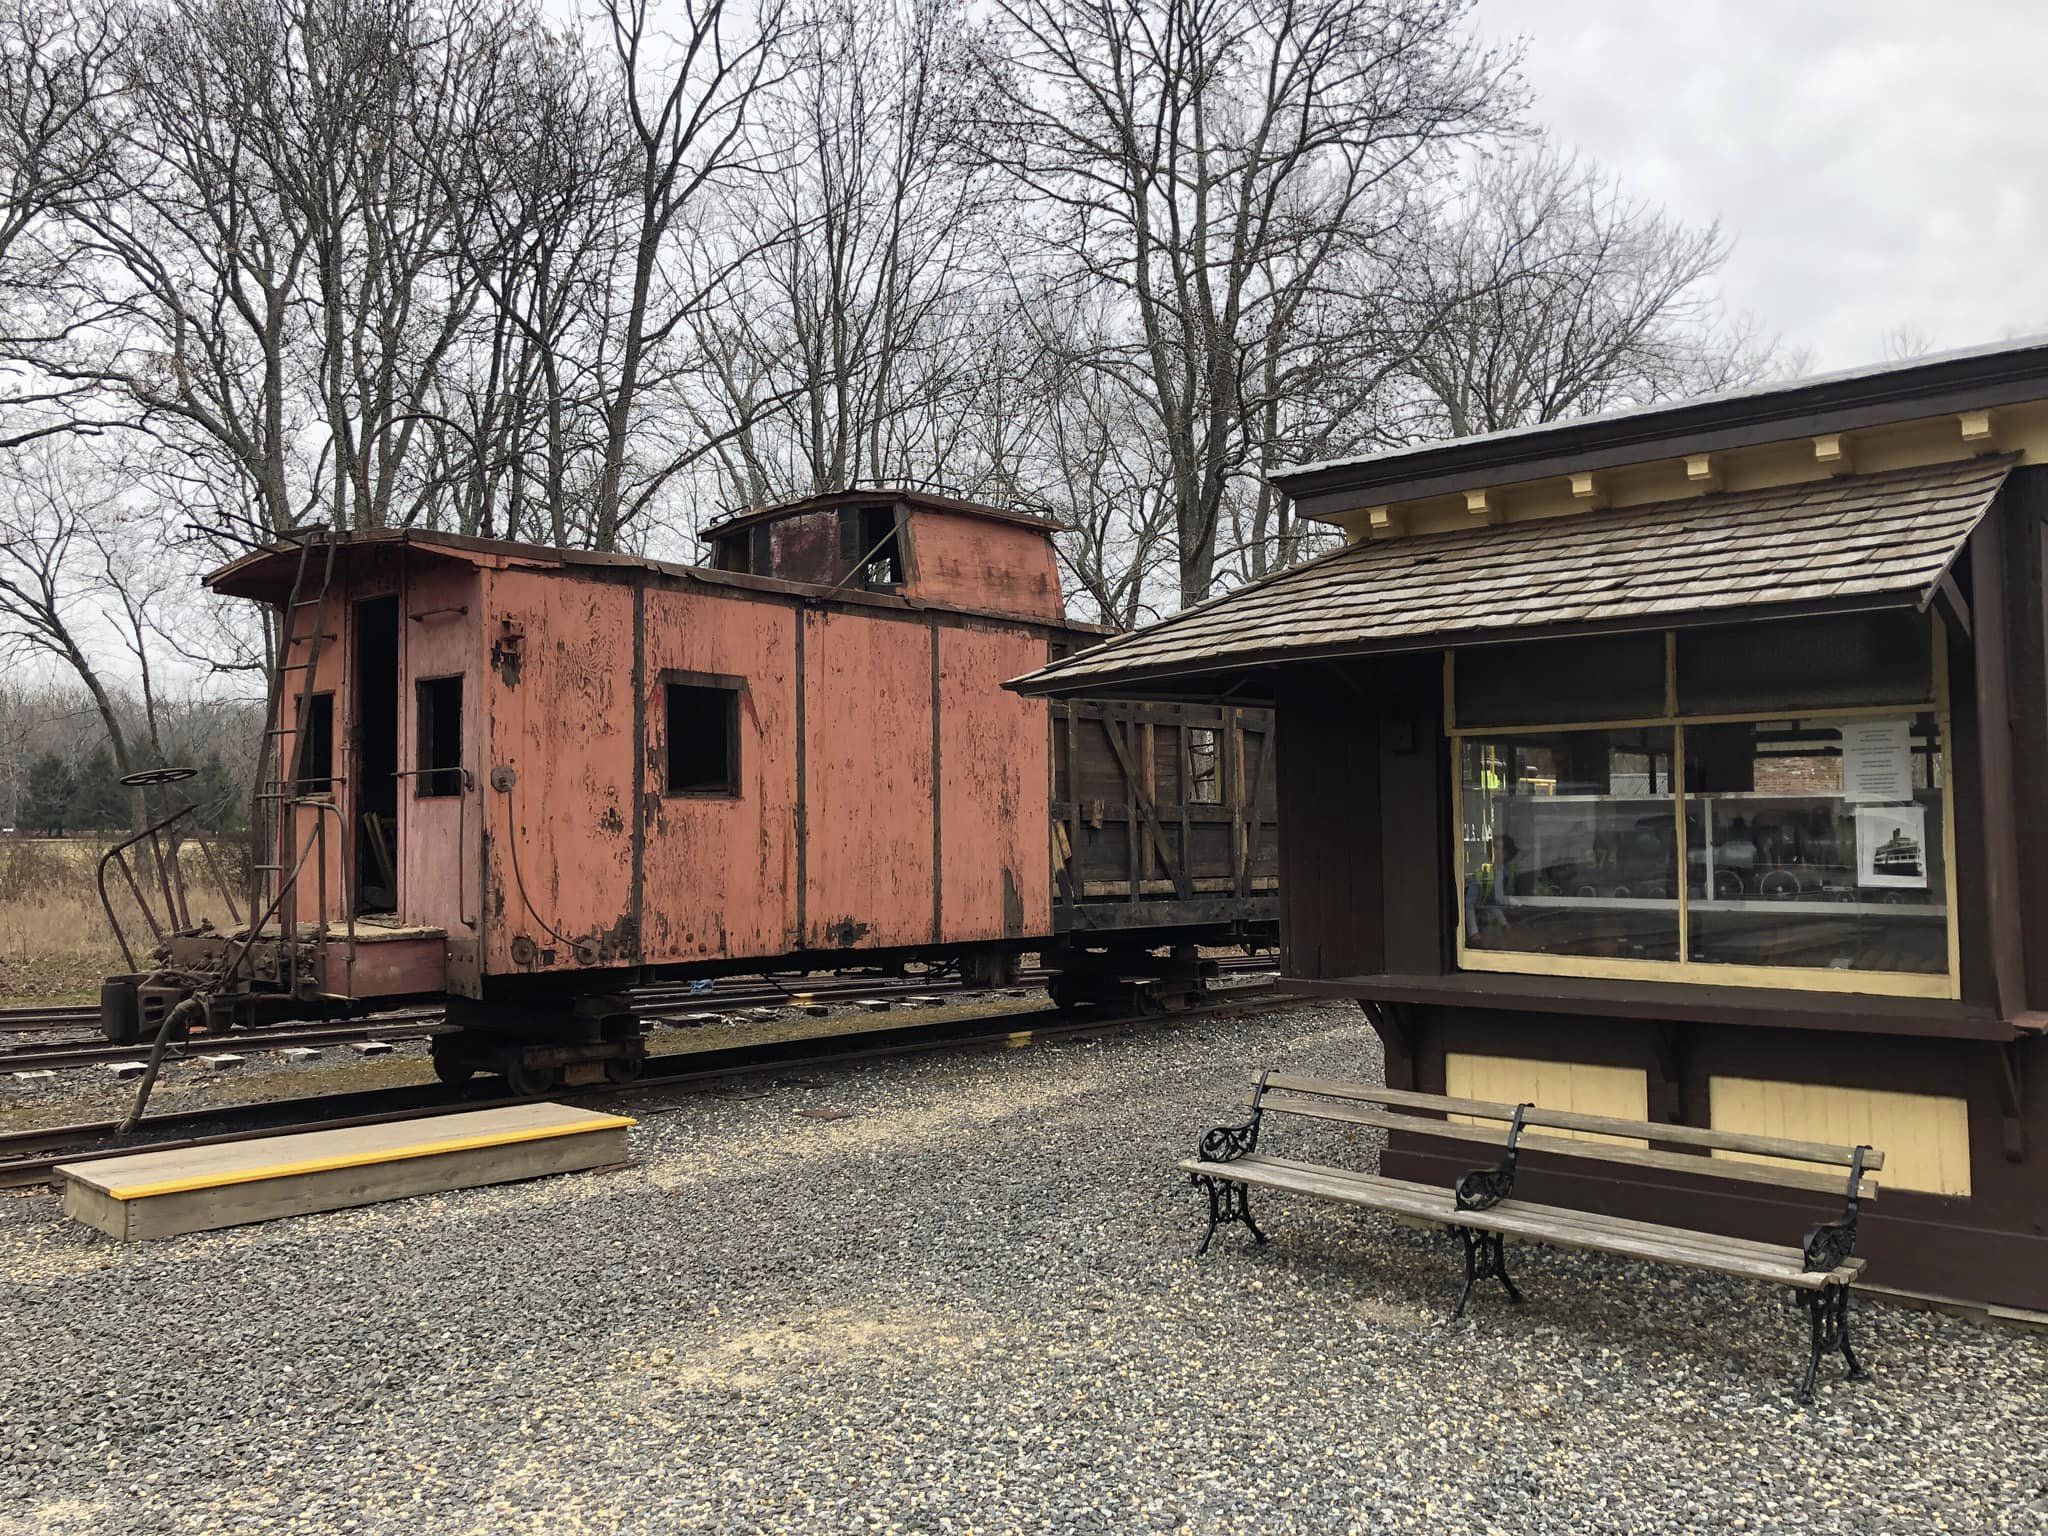 New Jersey Museum of Transportation starts restoration of Central Railroad of New Jersey caboose